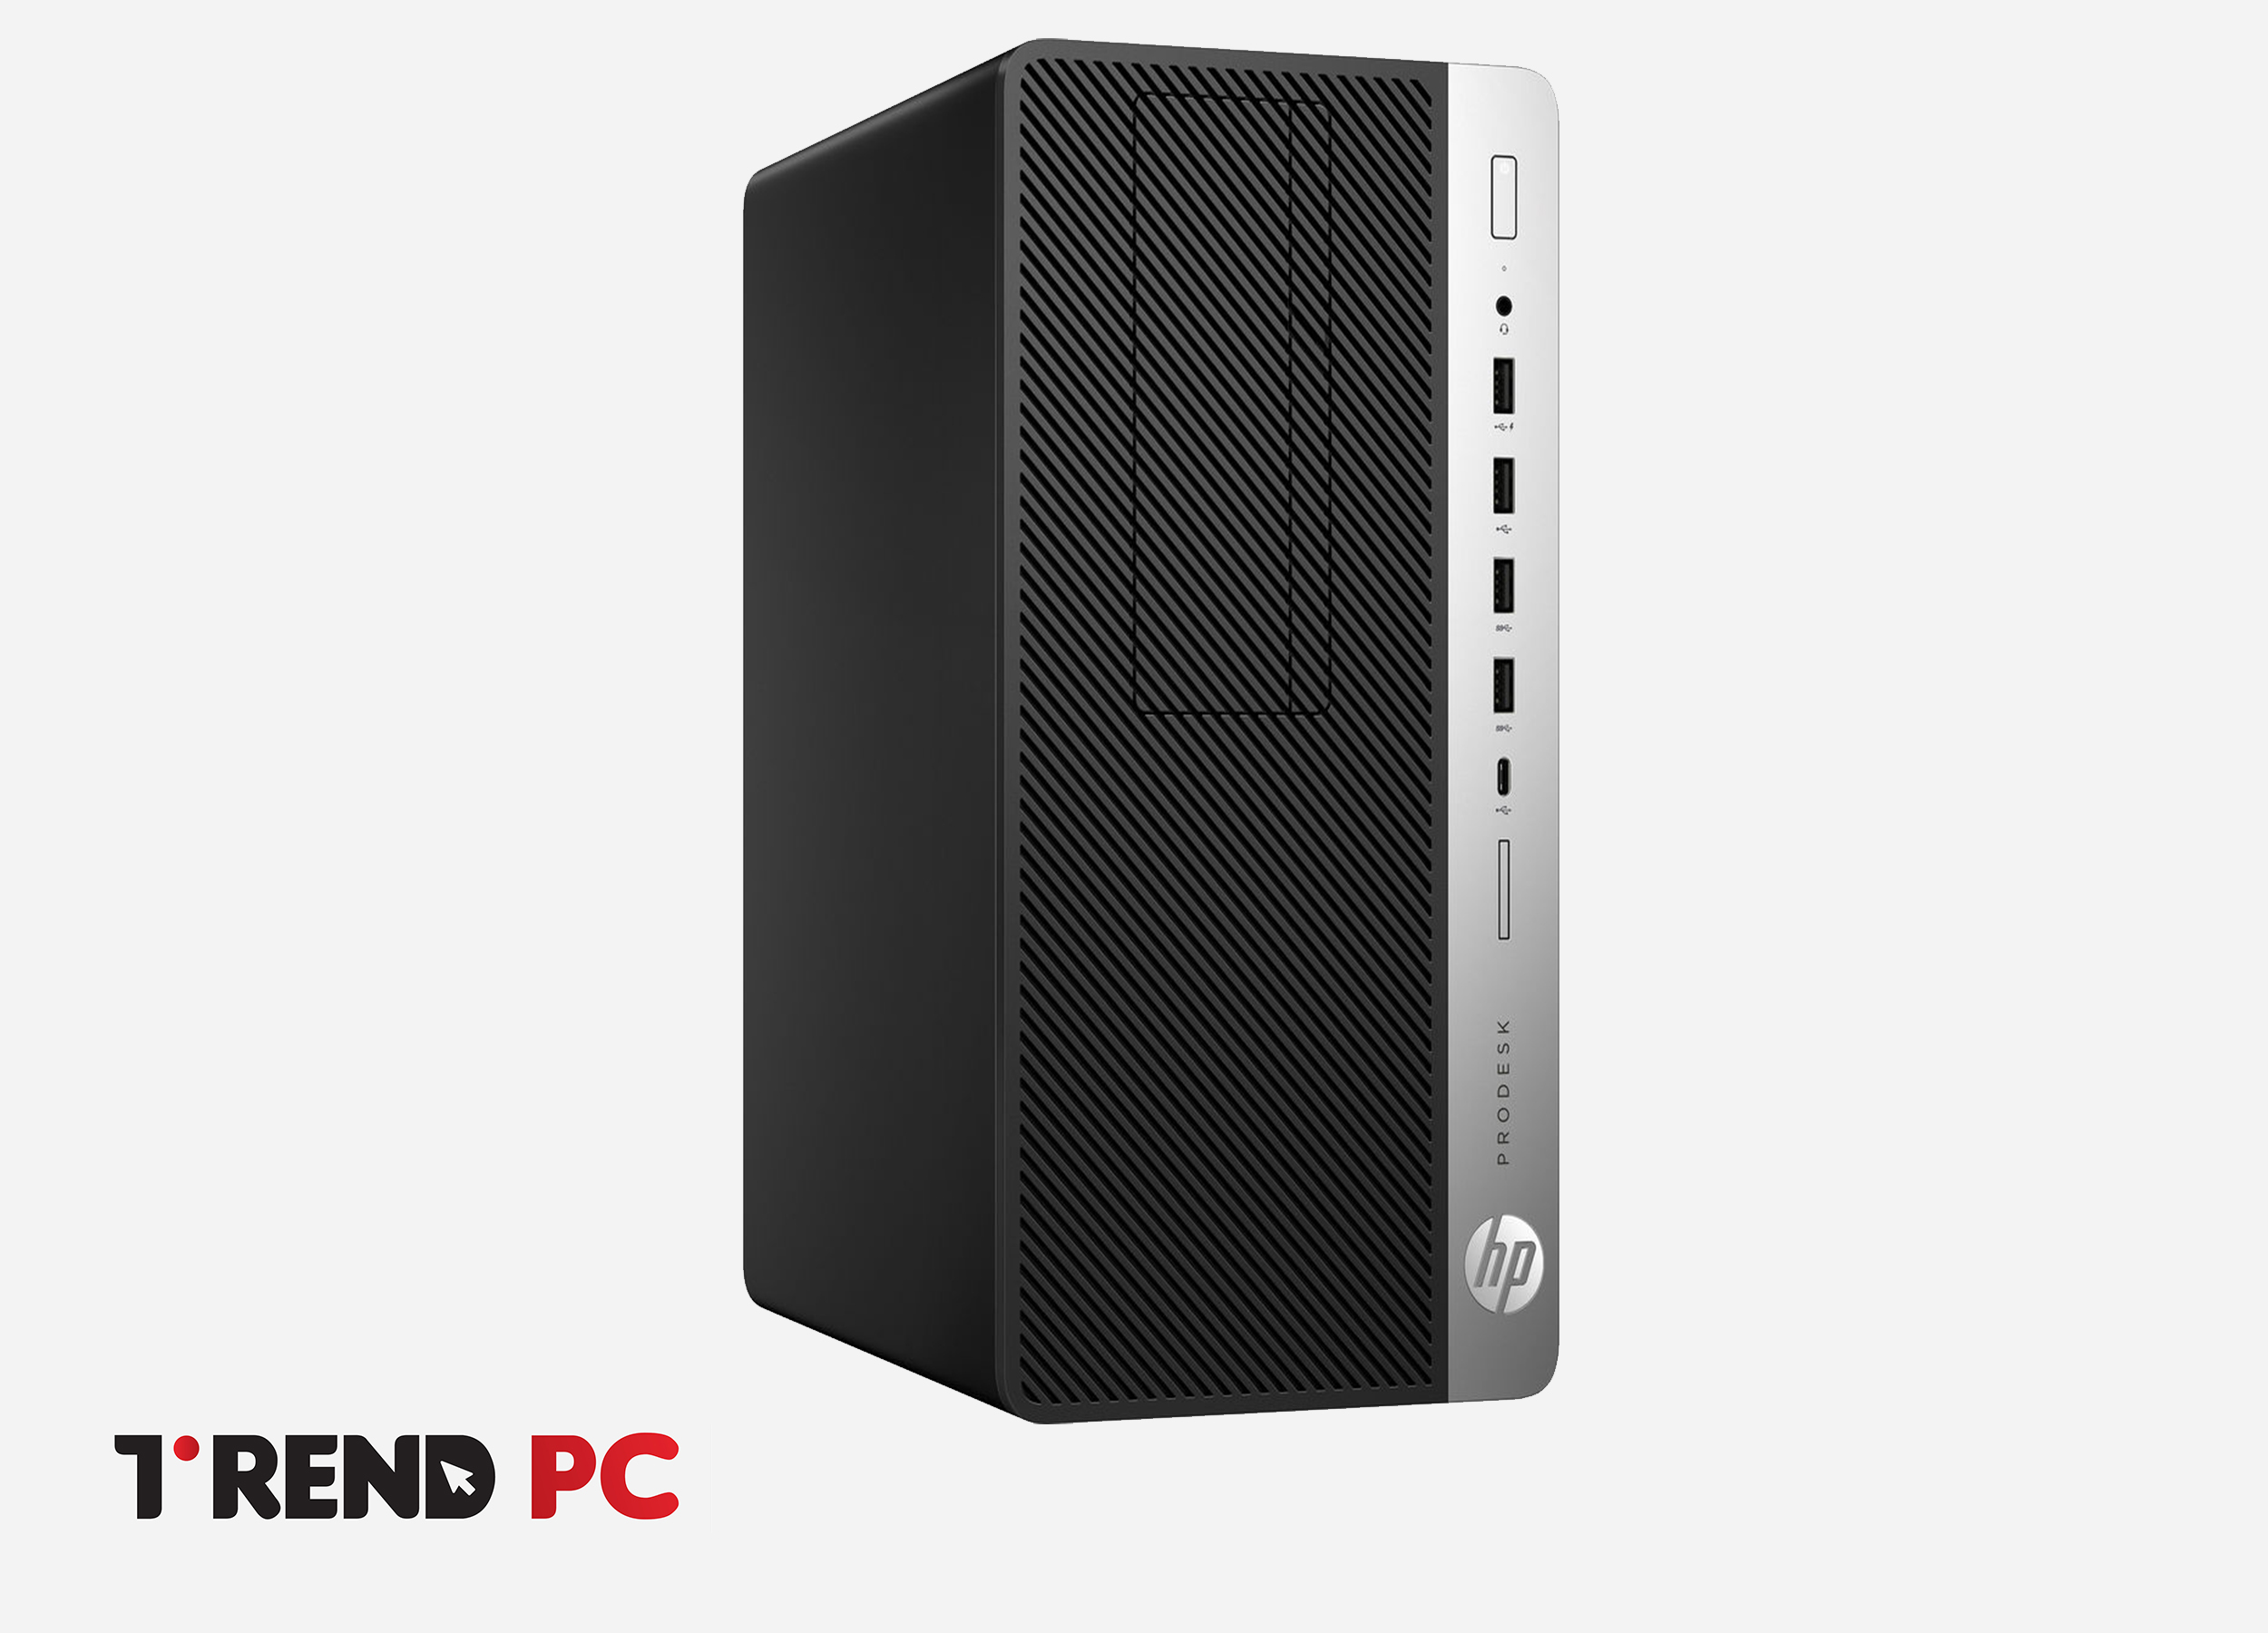 HP ProDesk 600G3 Microtower i5 6th